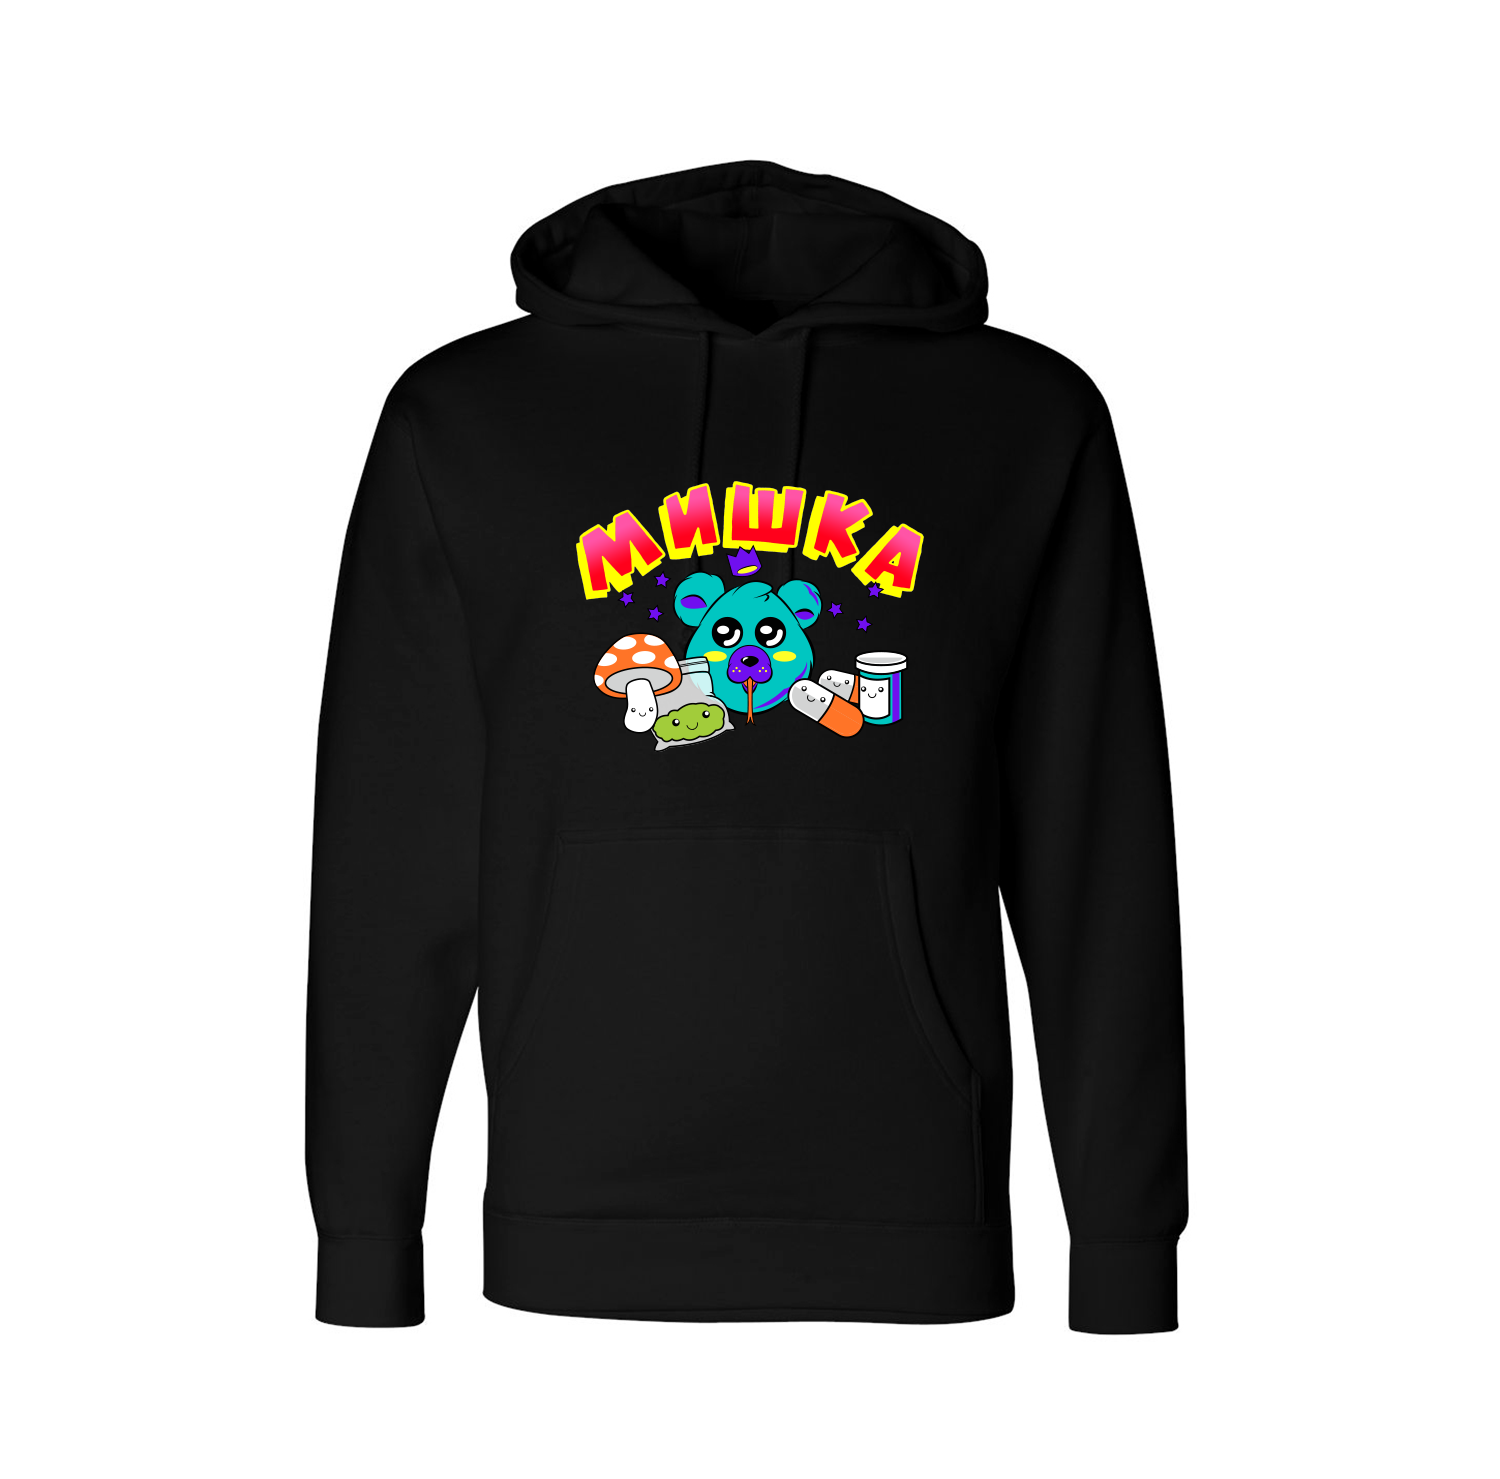 Too Cute For Death Pullover Hoodie - Mishka NYC